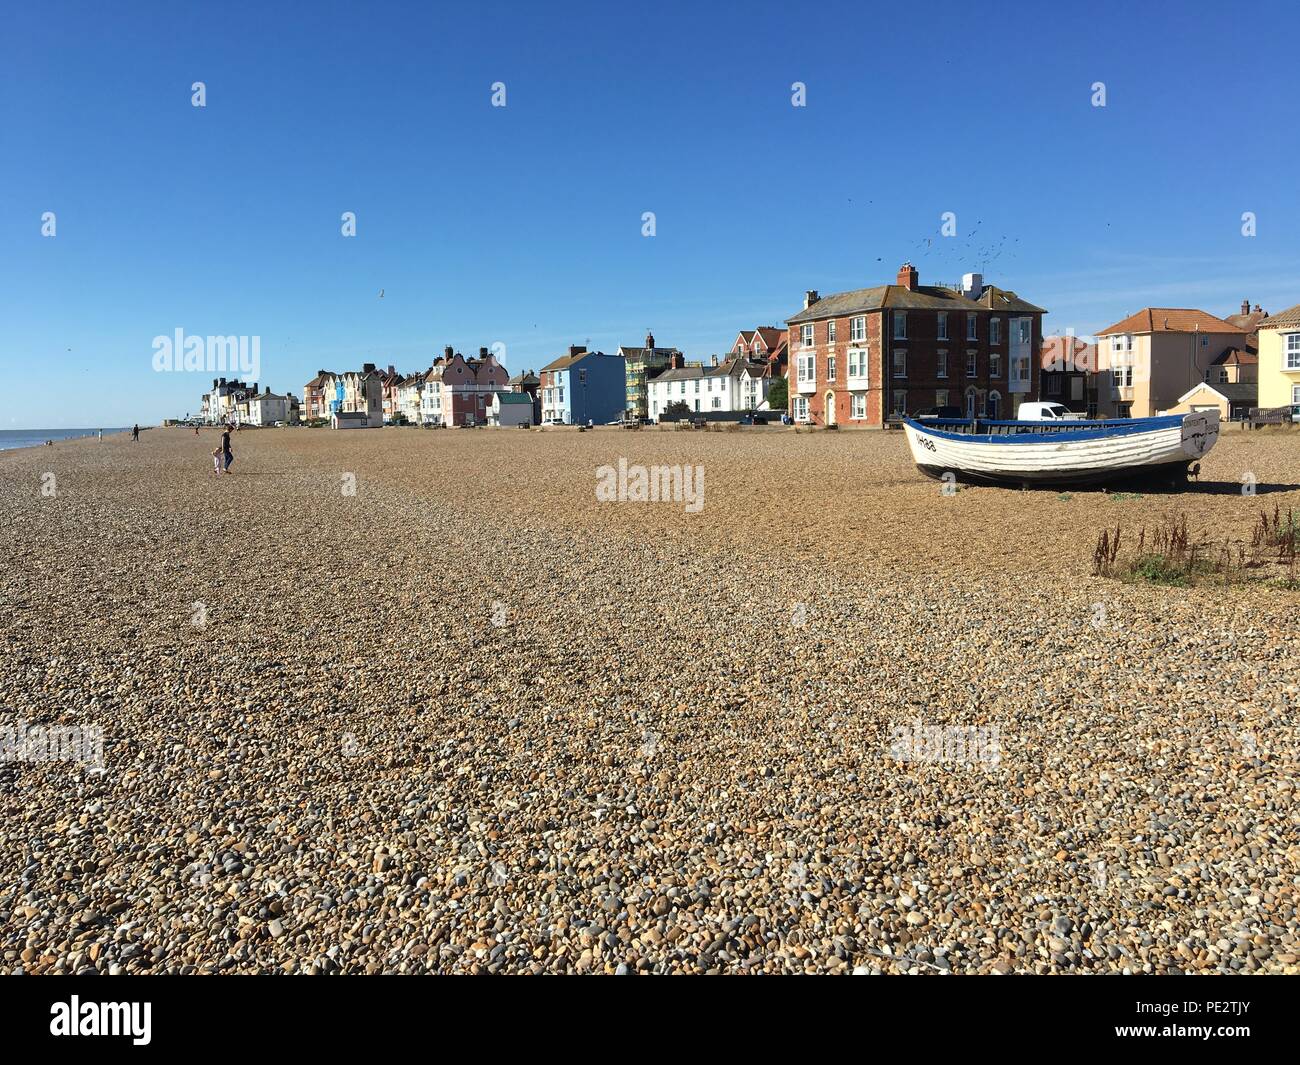 Fishing boats on the pebble beach at Aldeburgh, Suffolk Stock Photo